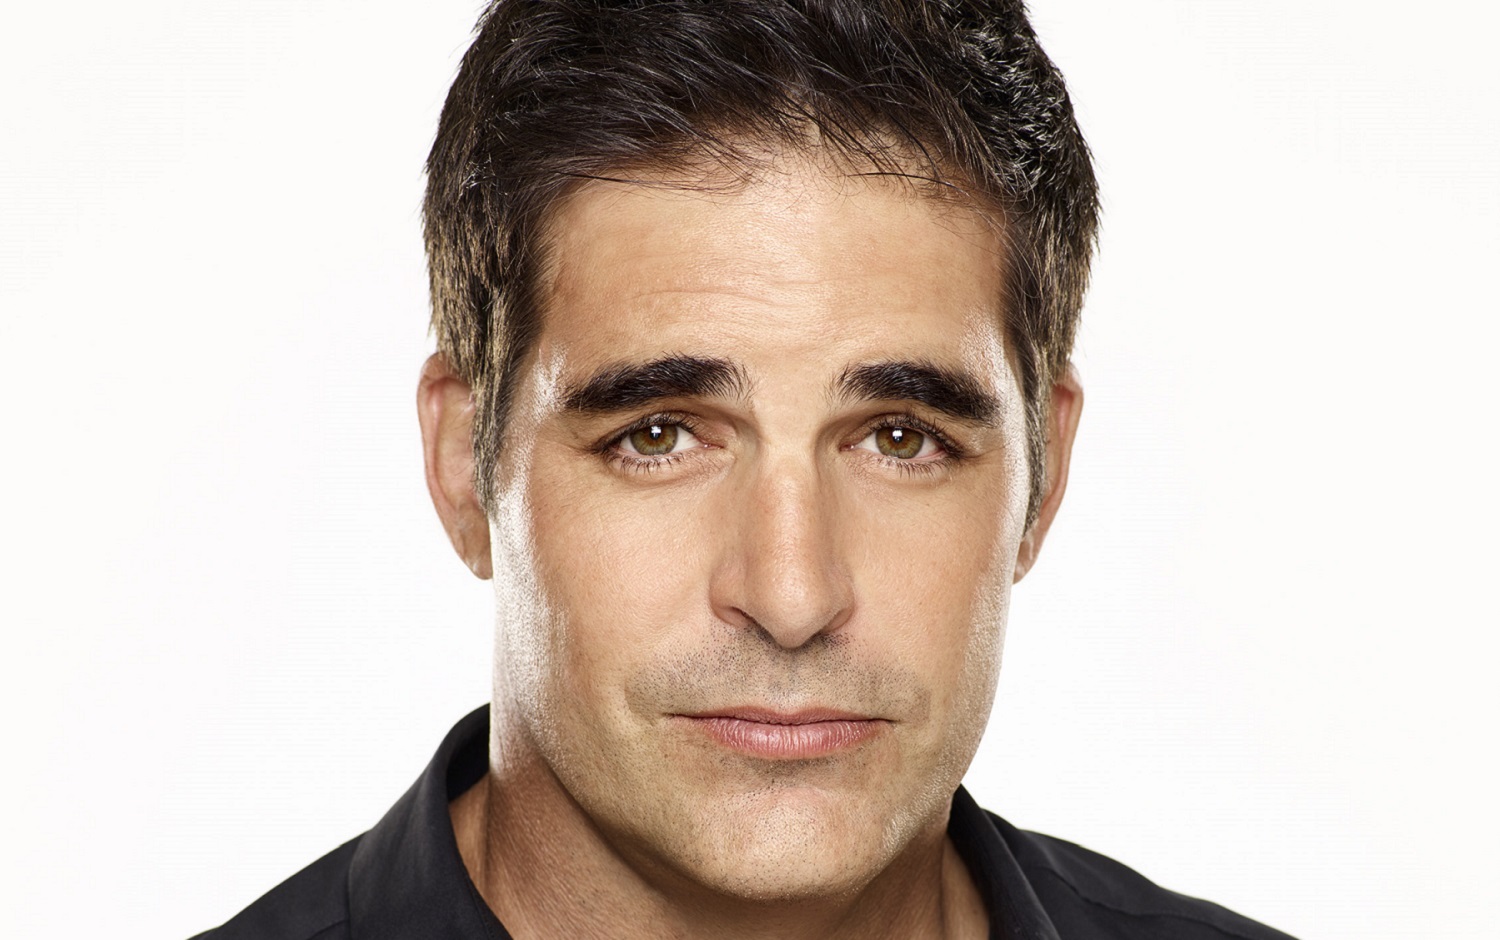 Days of Our Lives speculation focuses on Rafe Hernandez, played by Galen Gering, pictured here